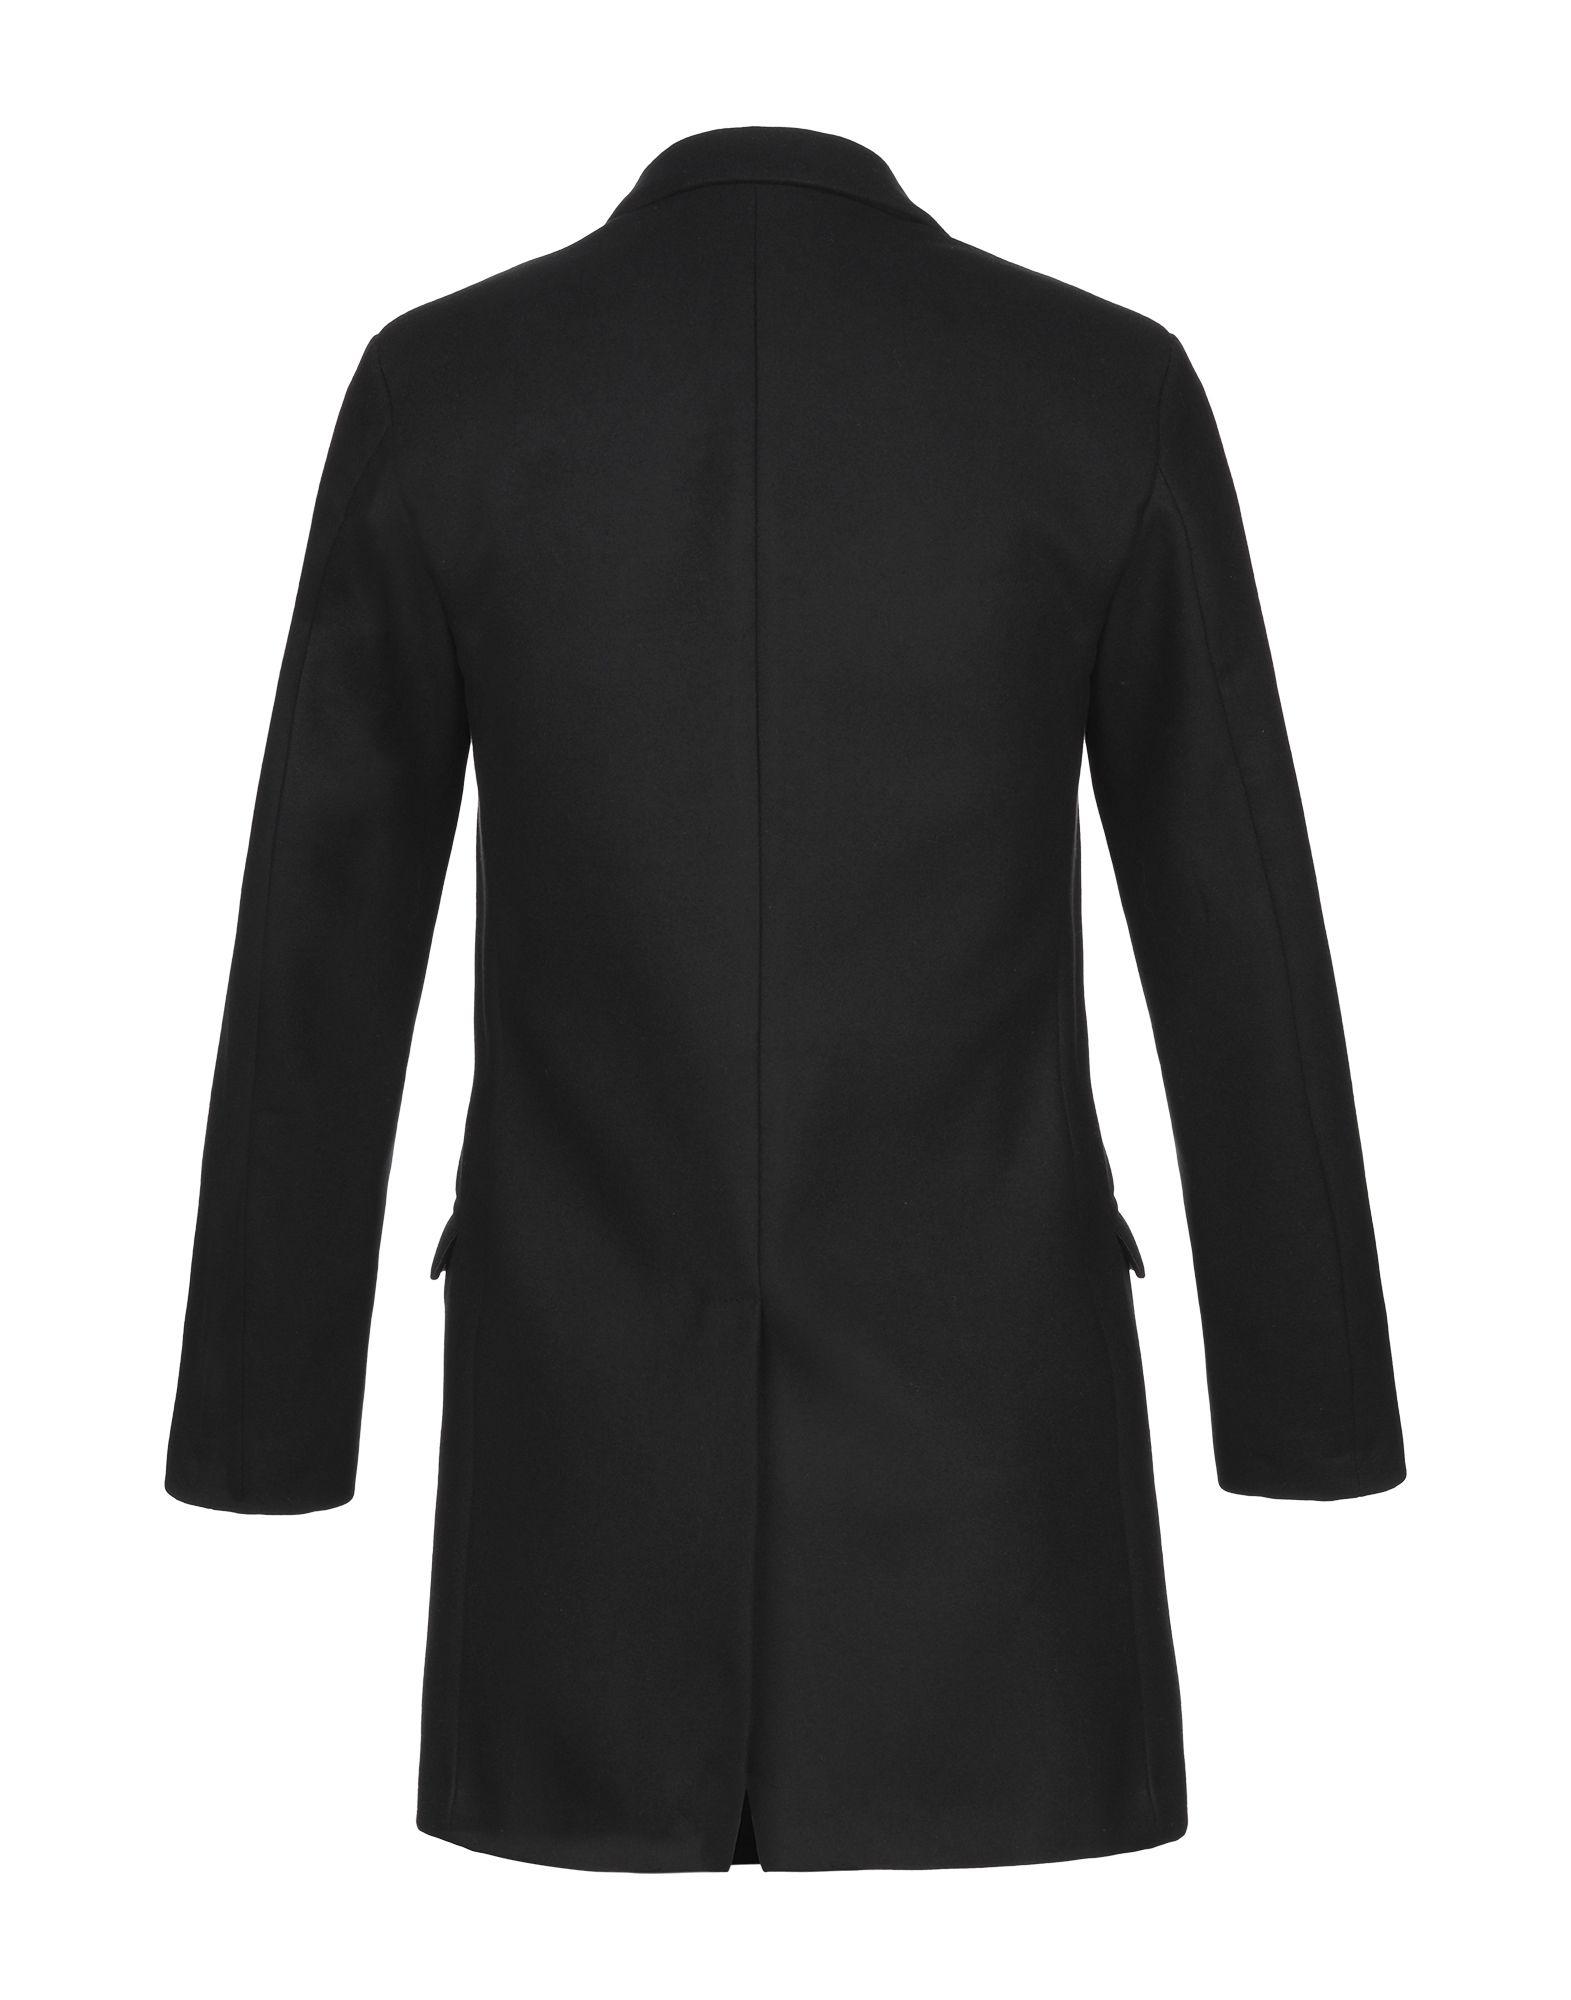 Imperial Synthetic Coat in Black for Men - Lyst